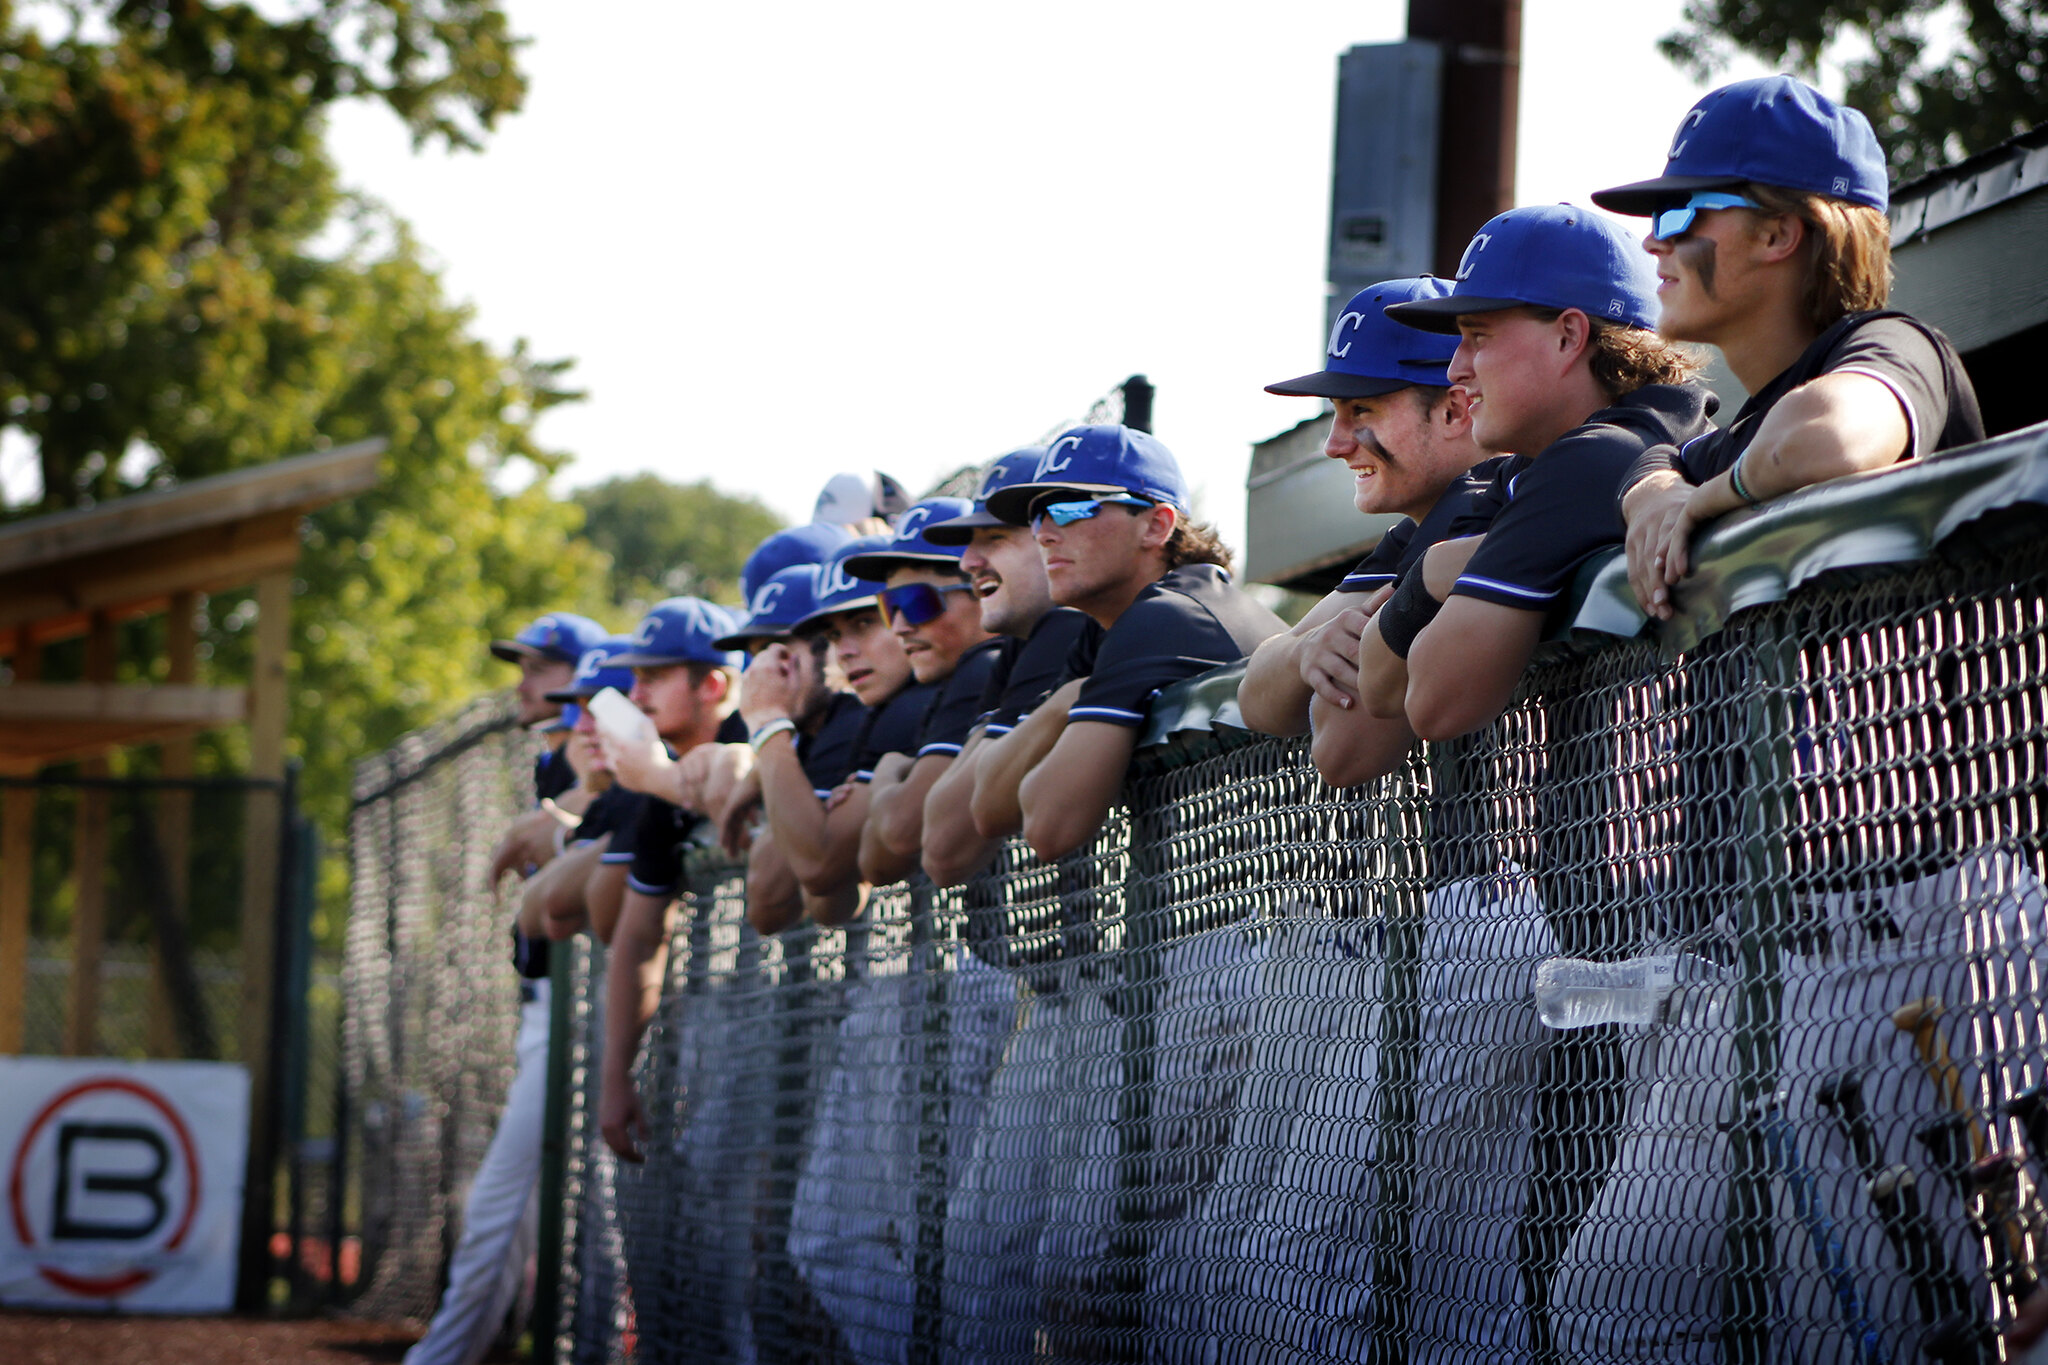 Line of baseball players waiting by a fence to play